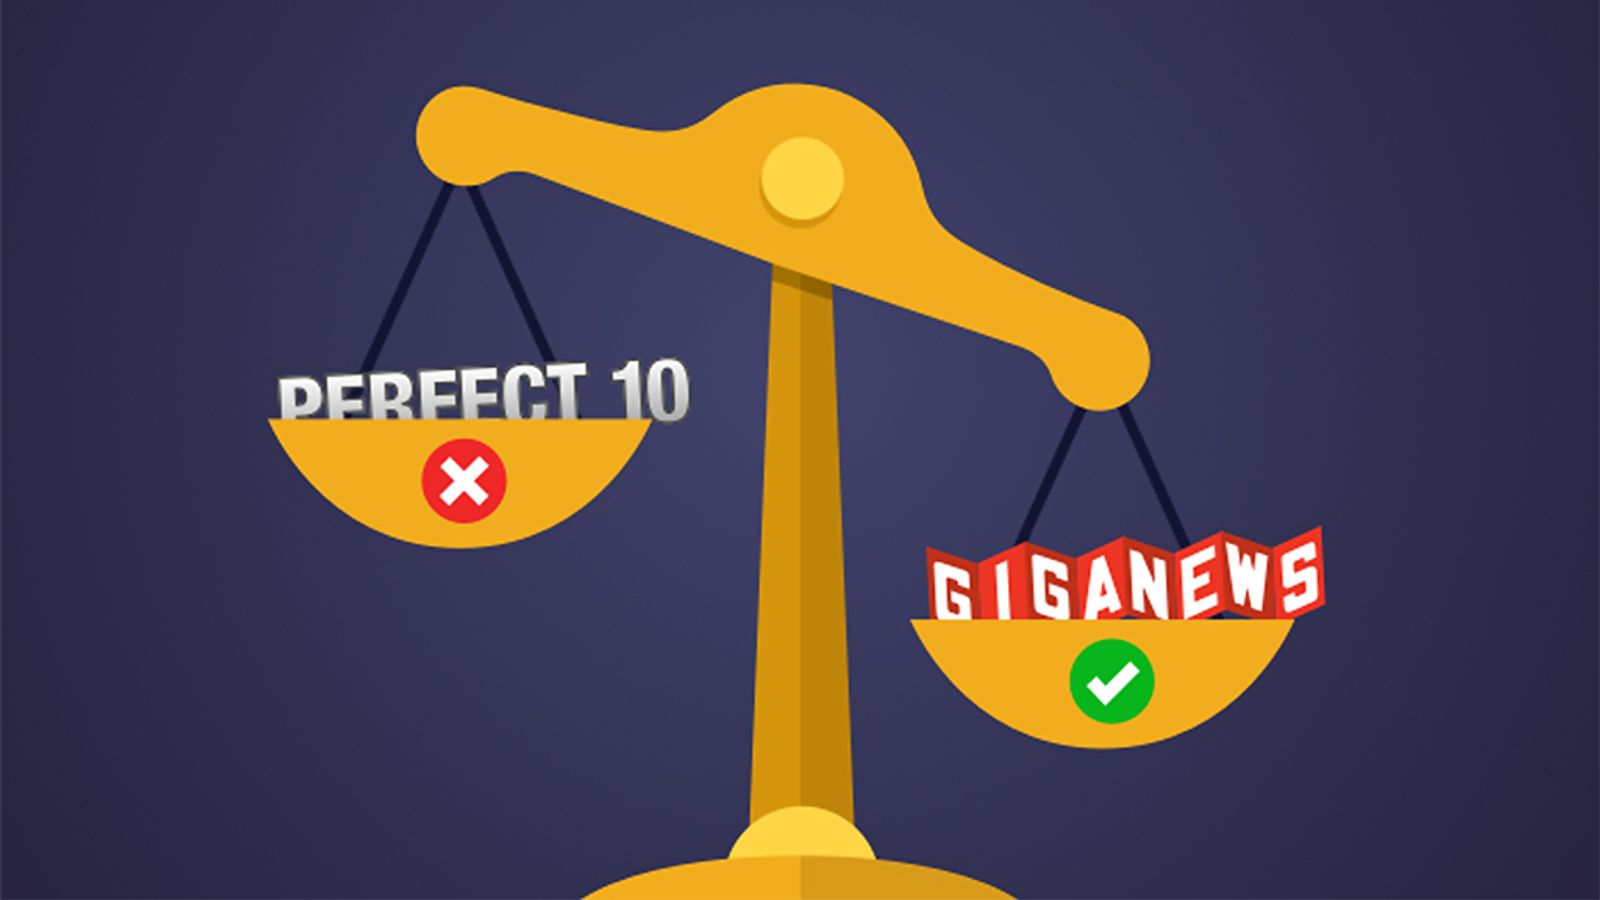 Giganews Sues Perfect 10 Over Unpaid Attorney Fees